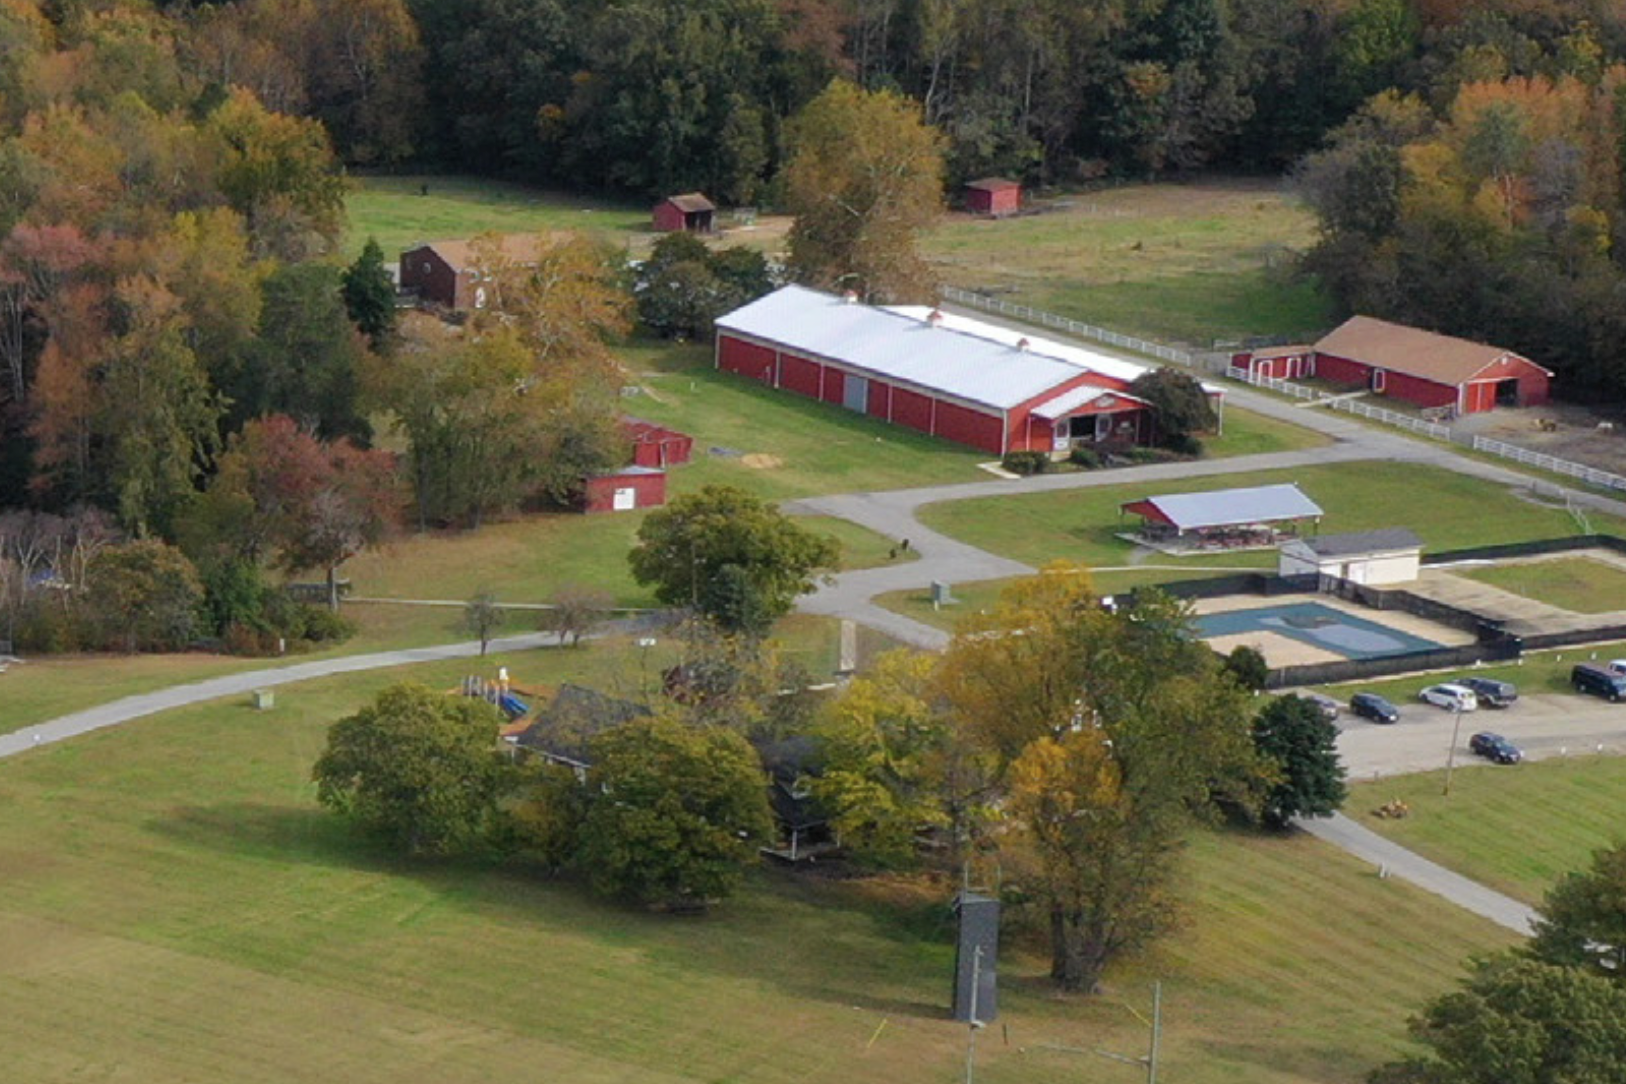 An aerial view of grounds at Camp Accomplish.